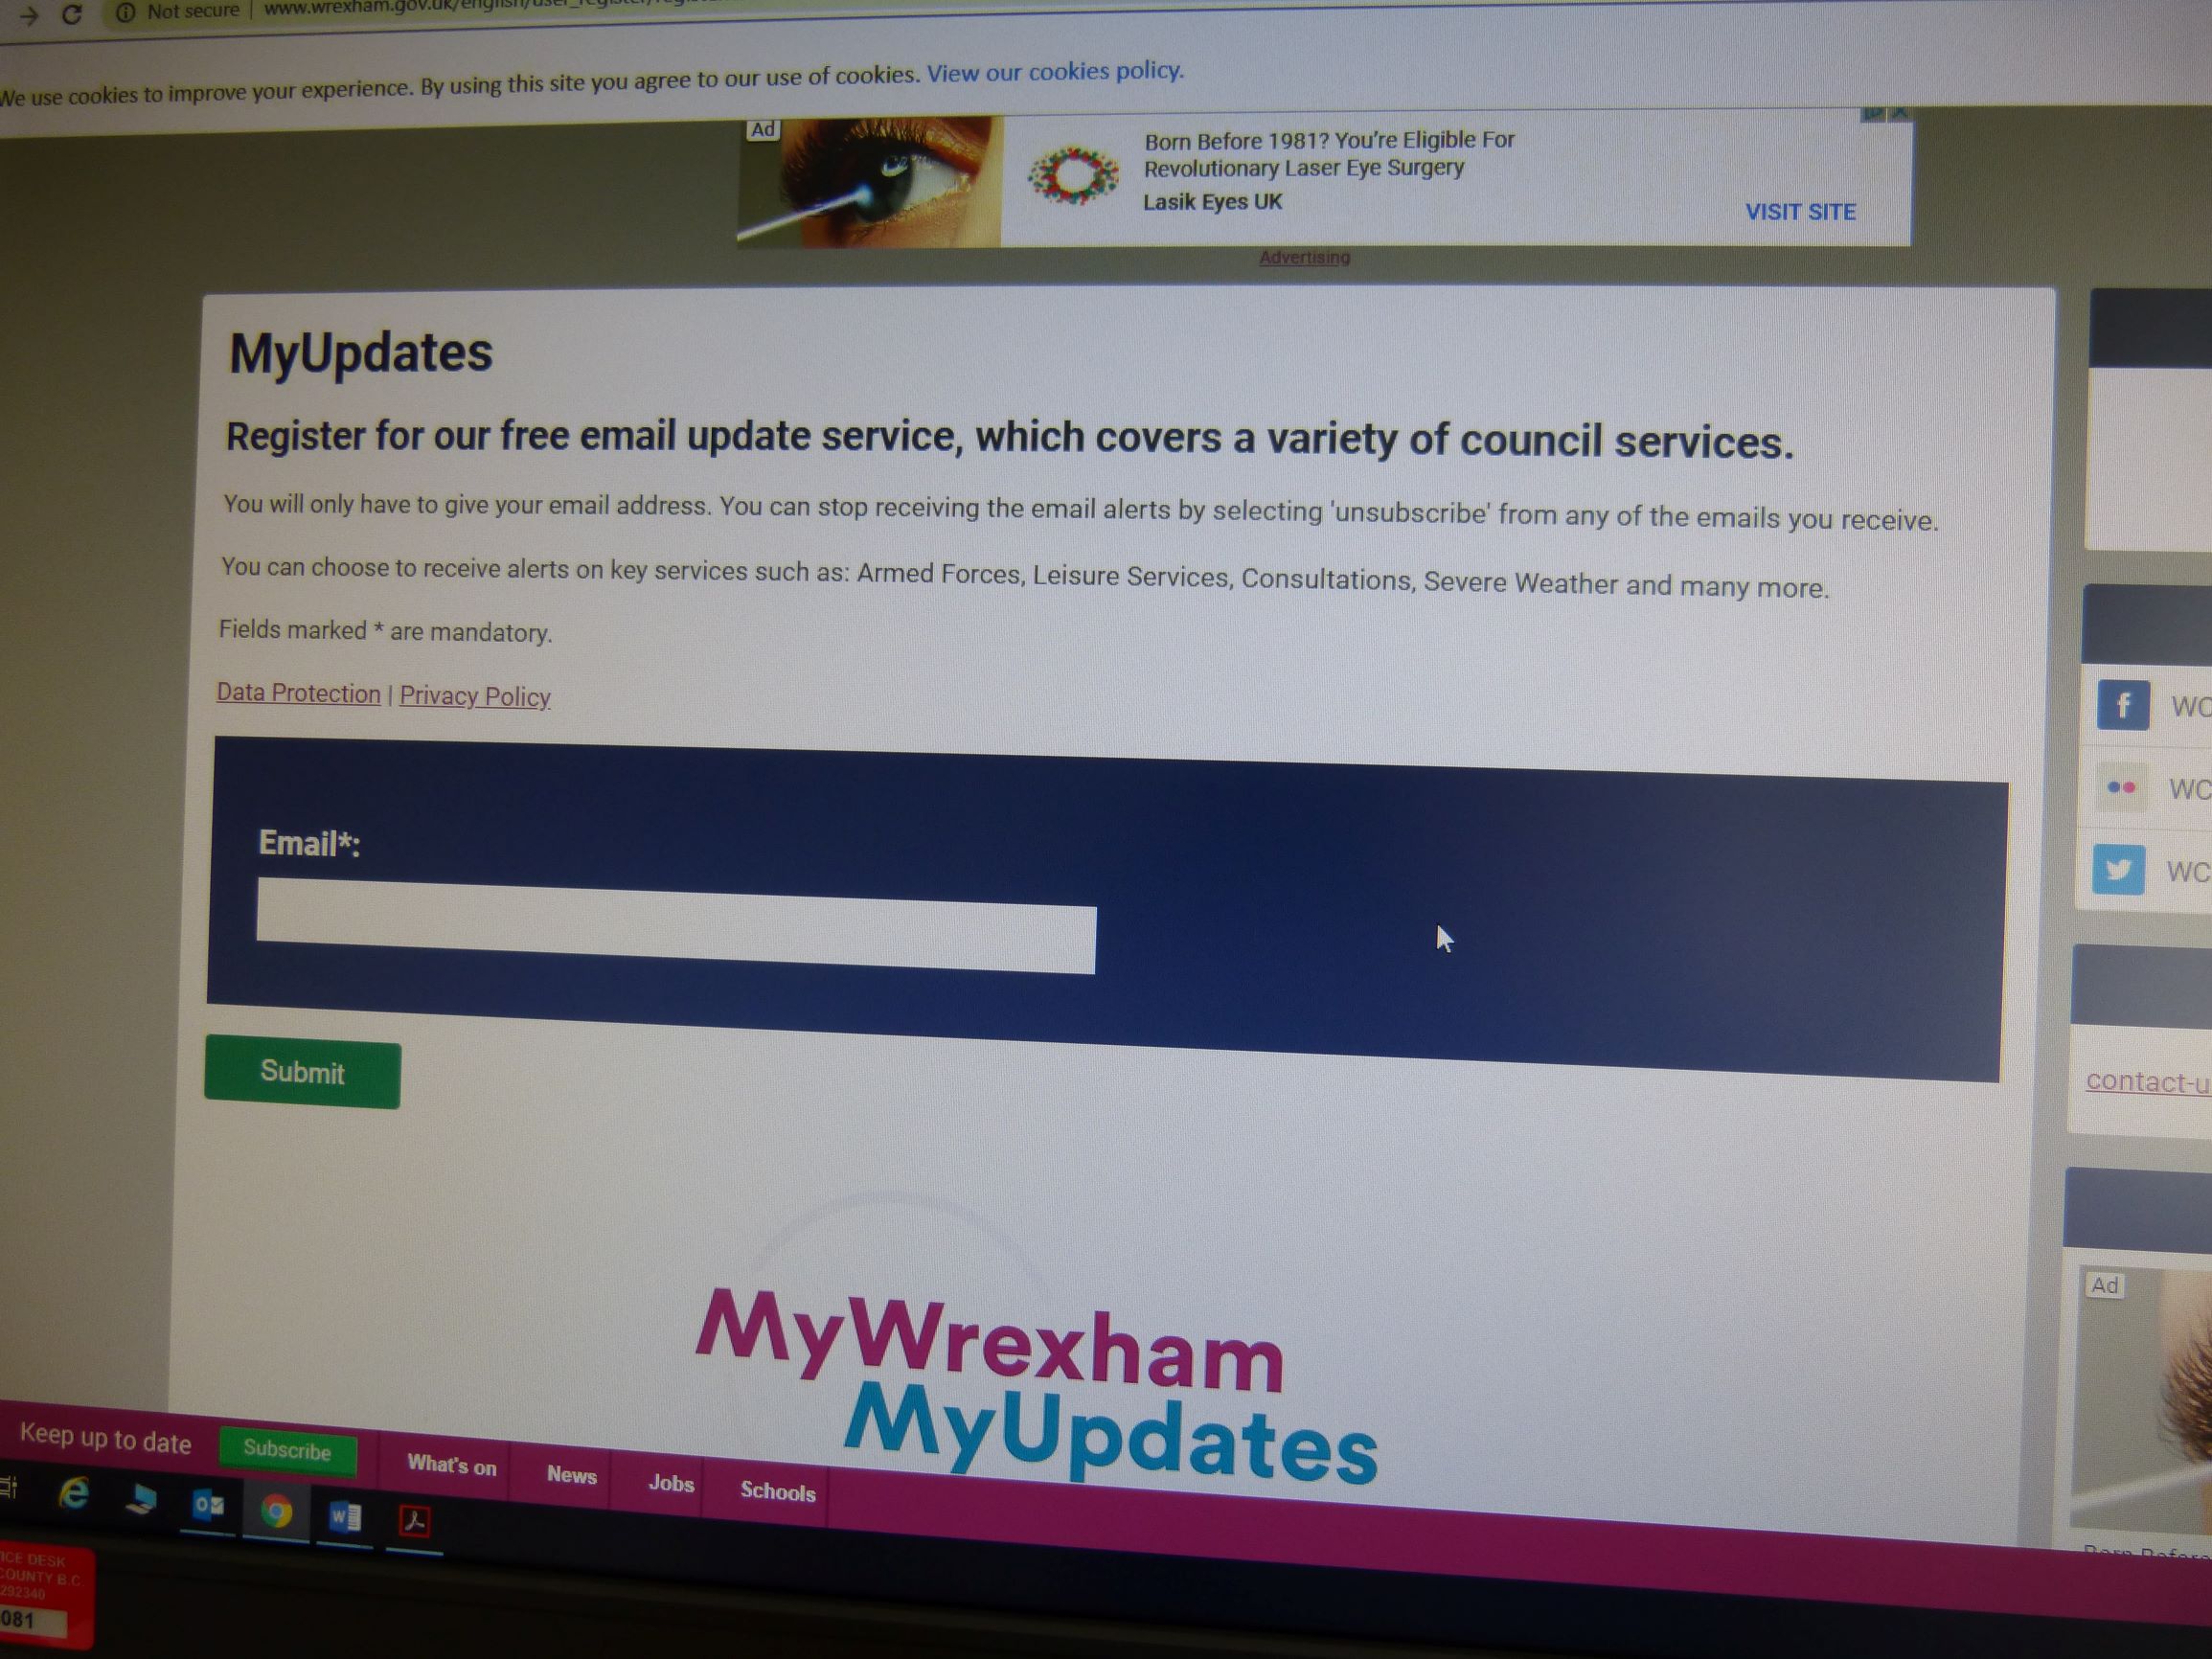 Stay up to date with what's going on at Wrexham Council